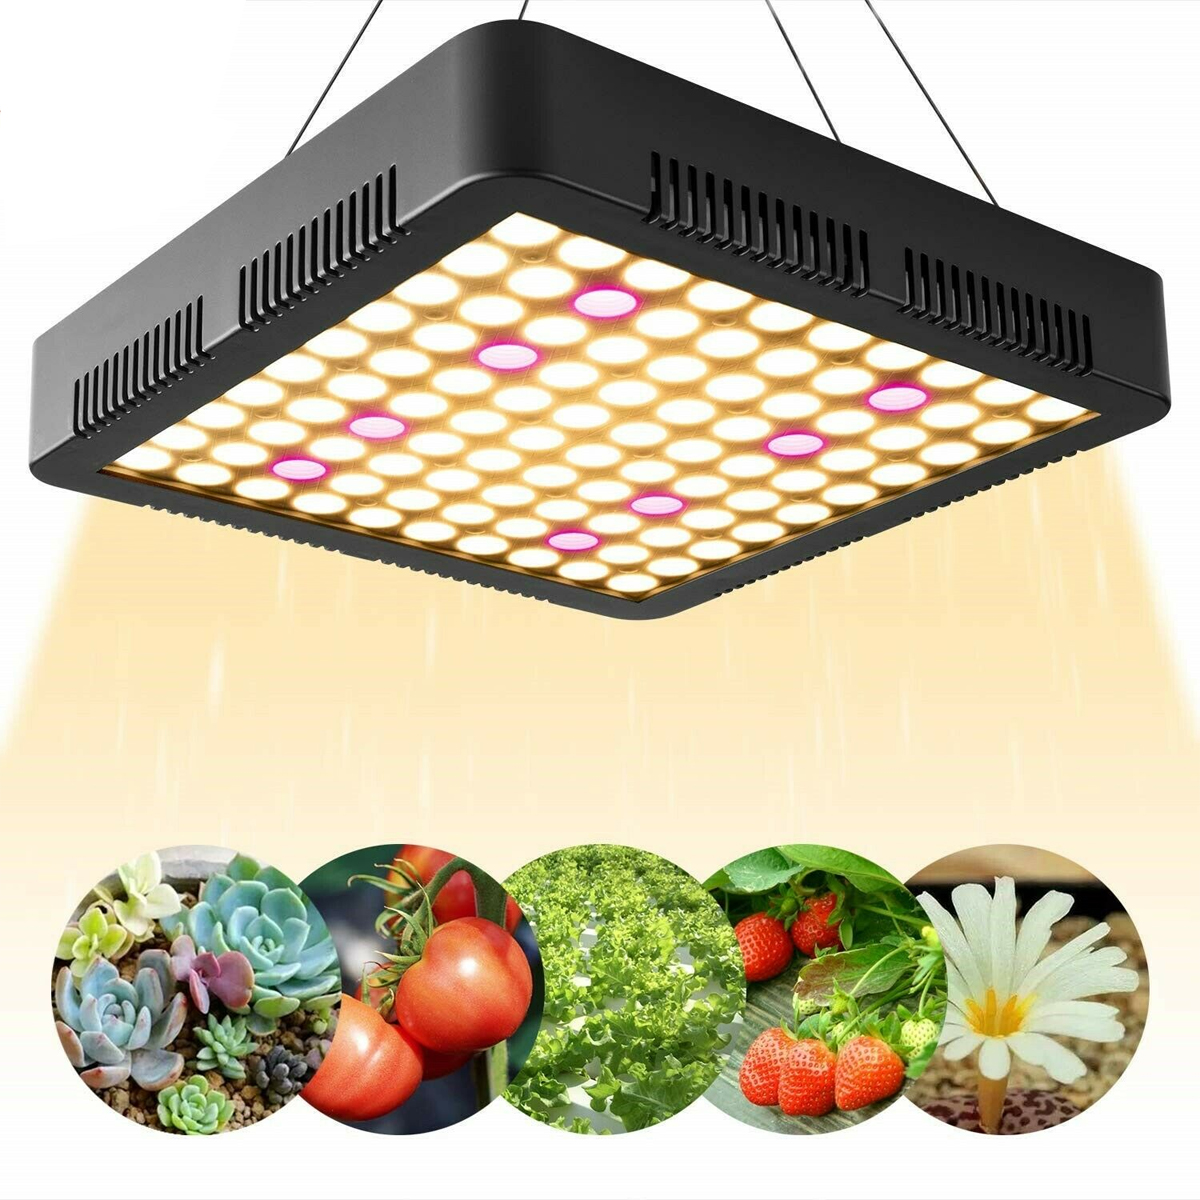 300W-LED-Grow-Light-Full-Spectrum-Hydroponic-Indoor-Plant-Flower-Growing-Bloom-Lamp-AC85-265V-1728585-1